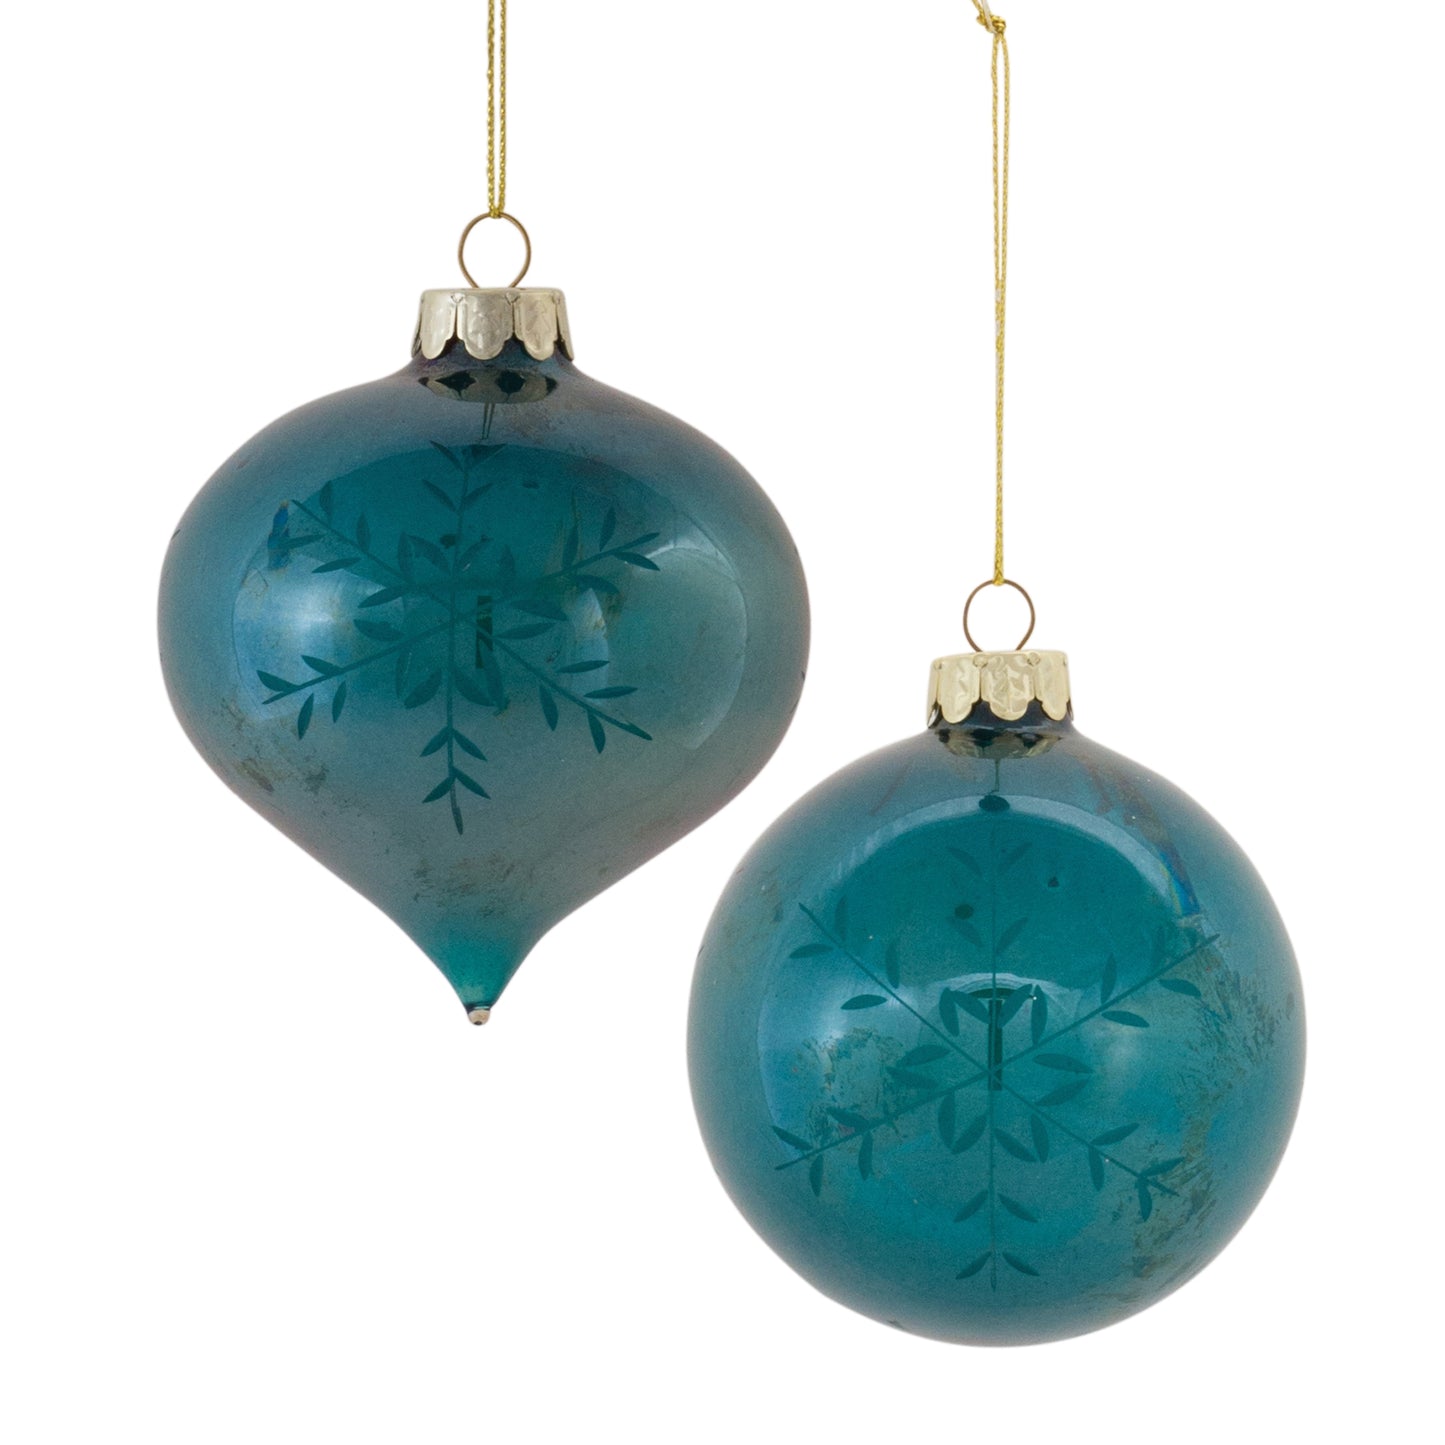 Snowflake Etched Green Glass Ornament Set Of 12